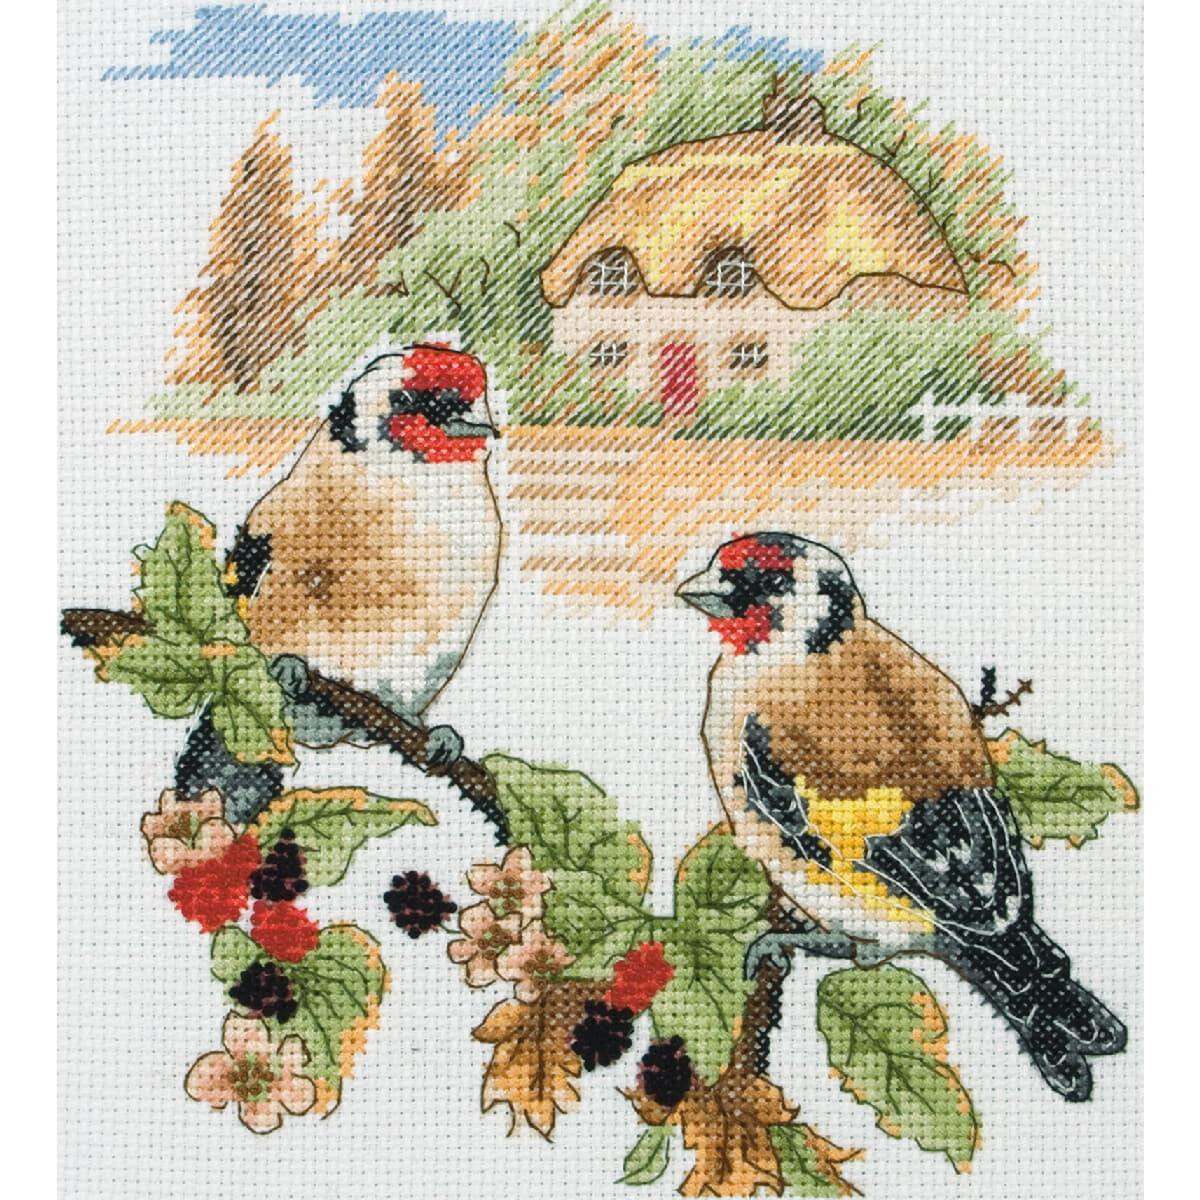 Anchor counted cross stitch kit "Autumn...